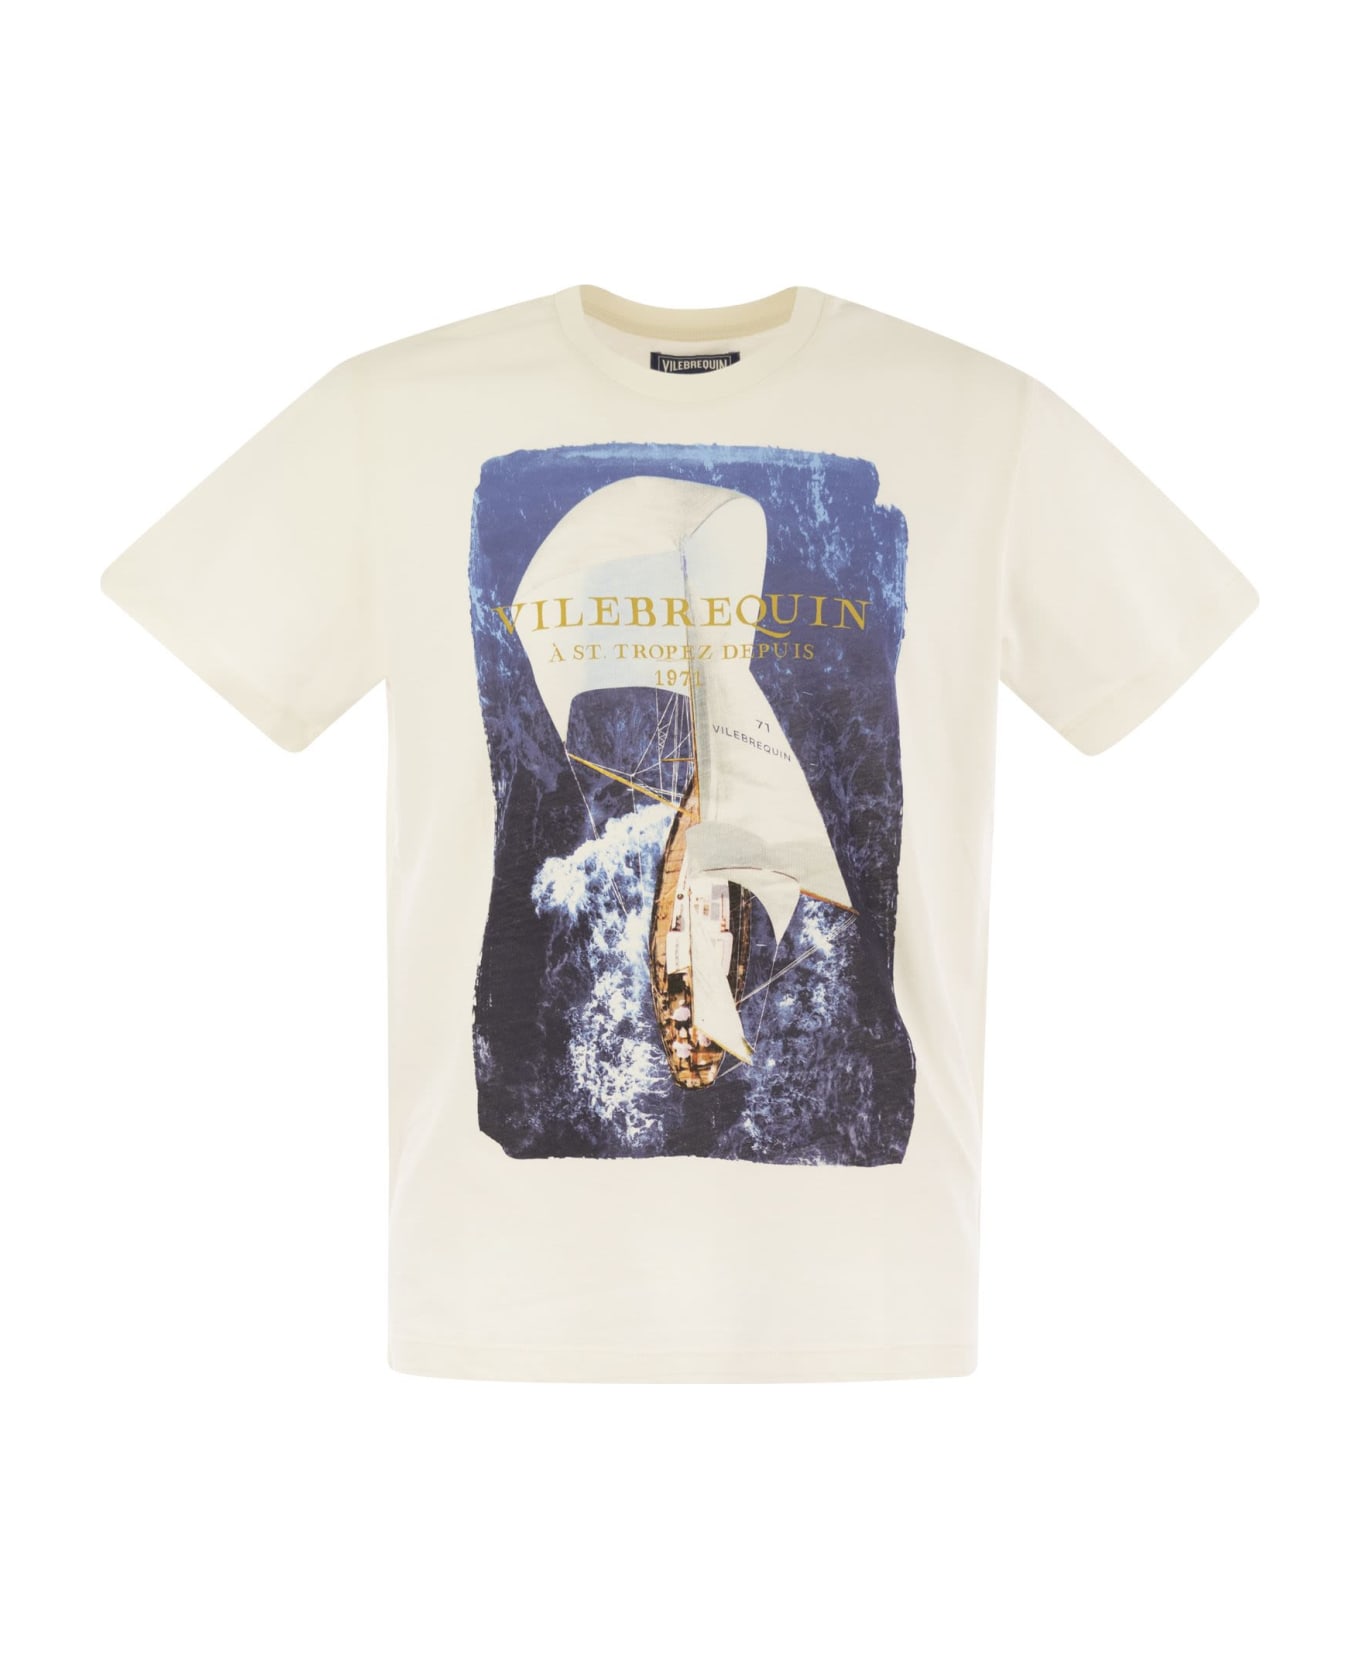 Vilebrequin Cotton T-shirt With Frontal Print - White